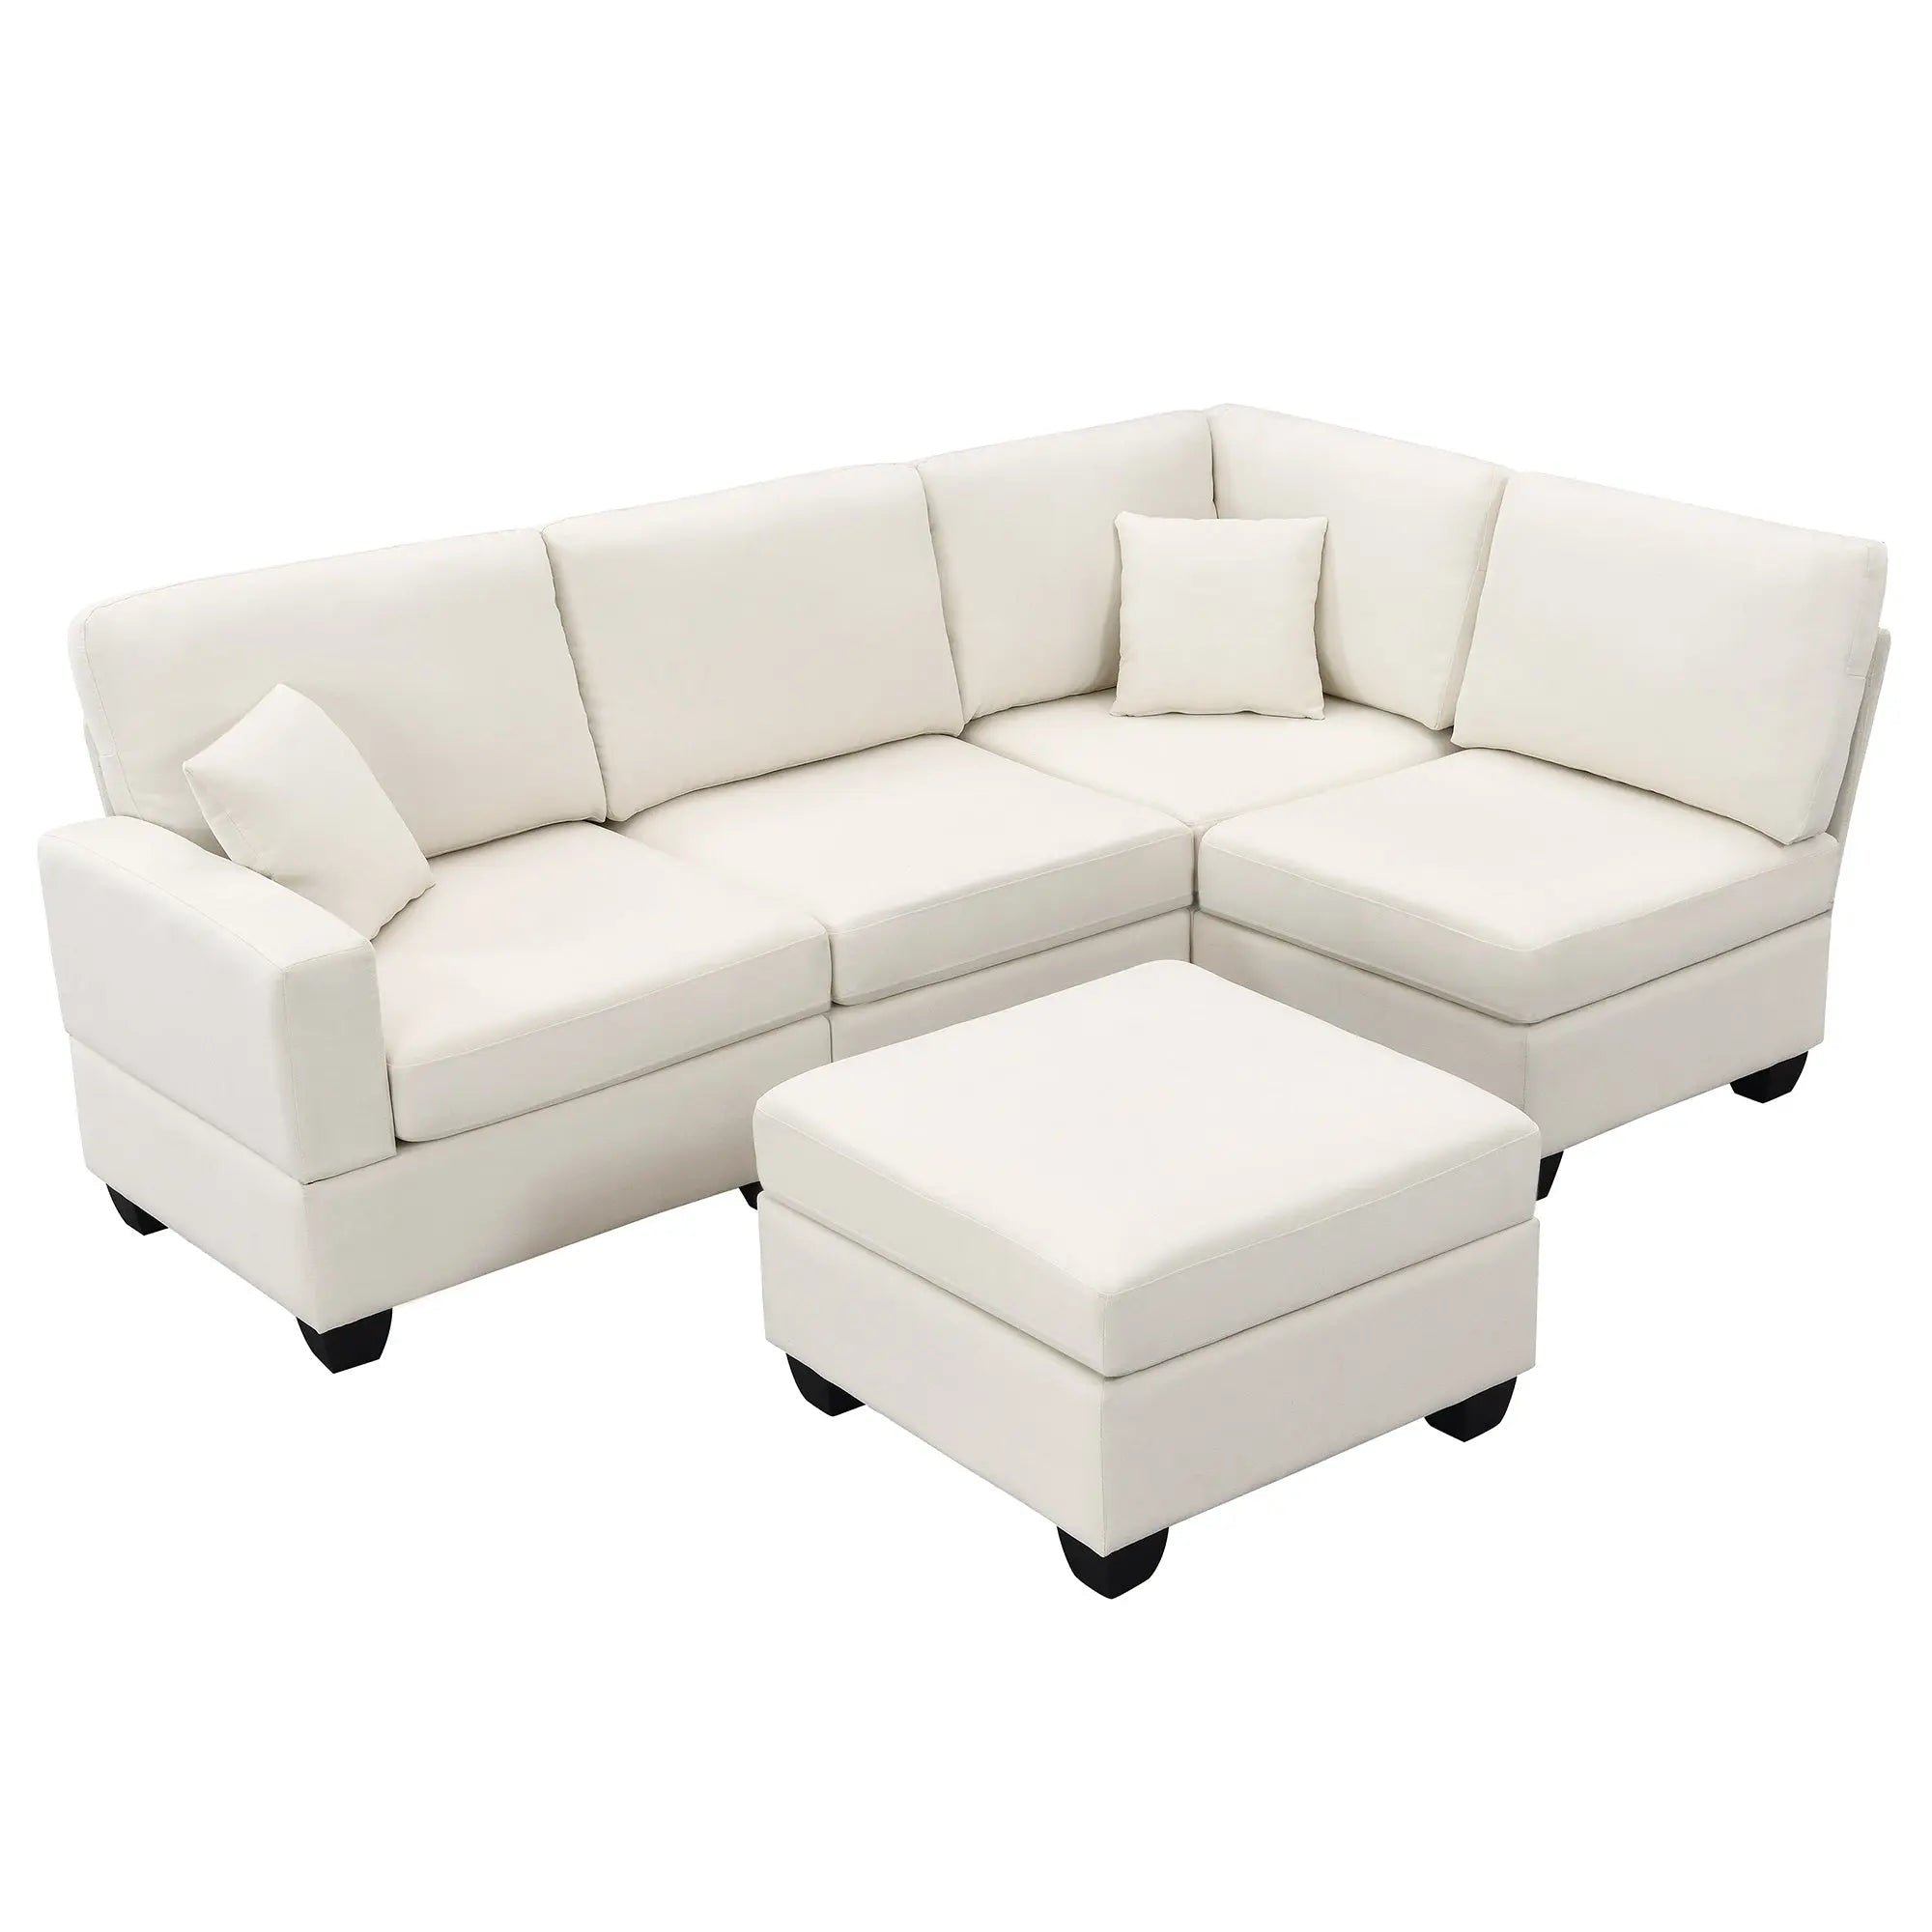 Bellemave 90" Modern L-Shape Sectional Sofa,5-Seat Modular Couch Set with Convertible Ottoman and 2 Pillows Bellemave